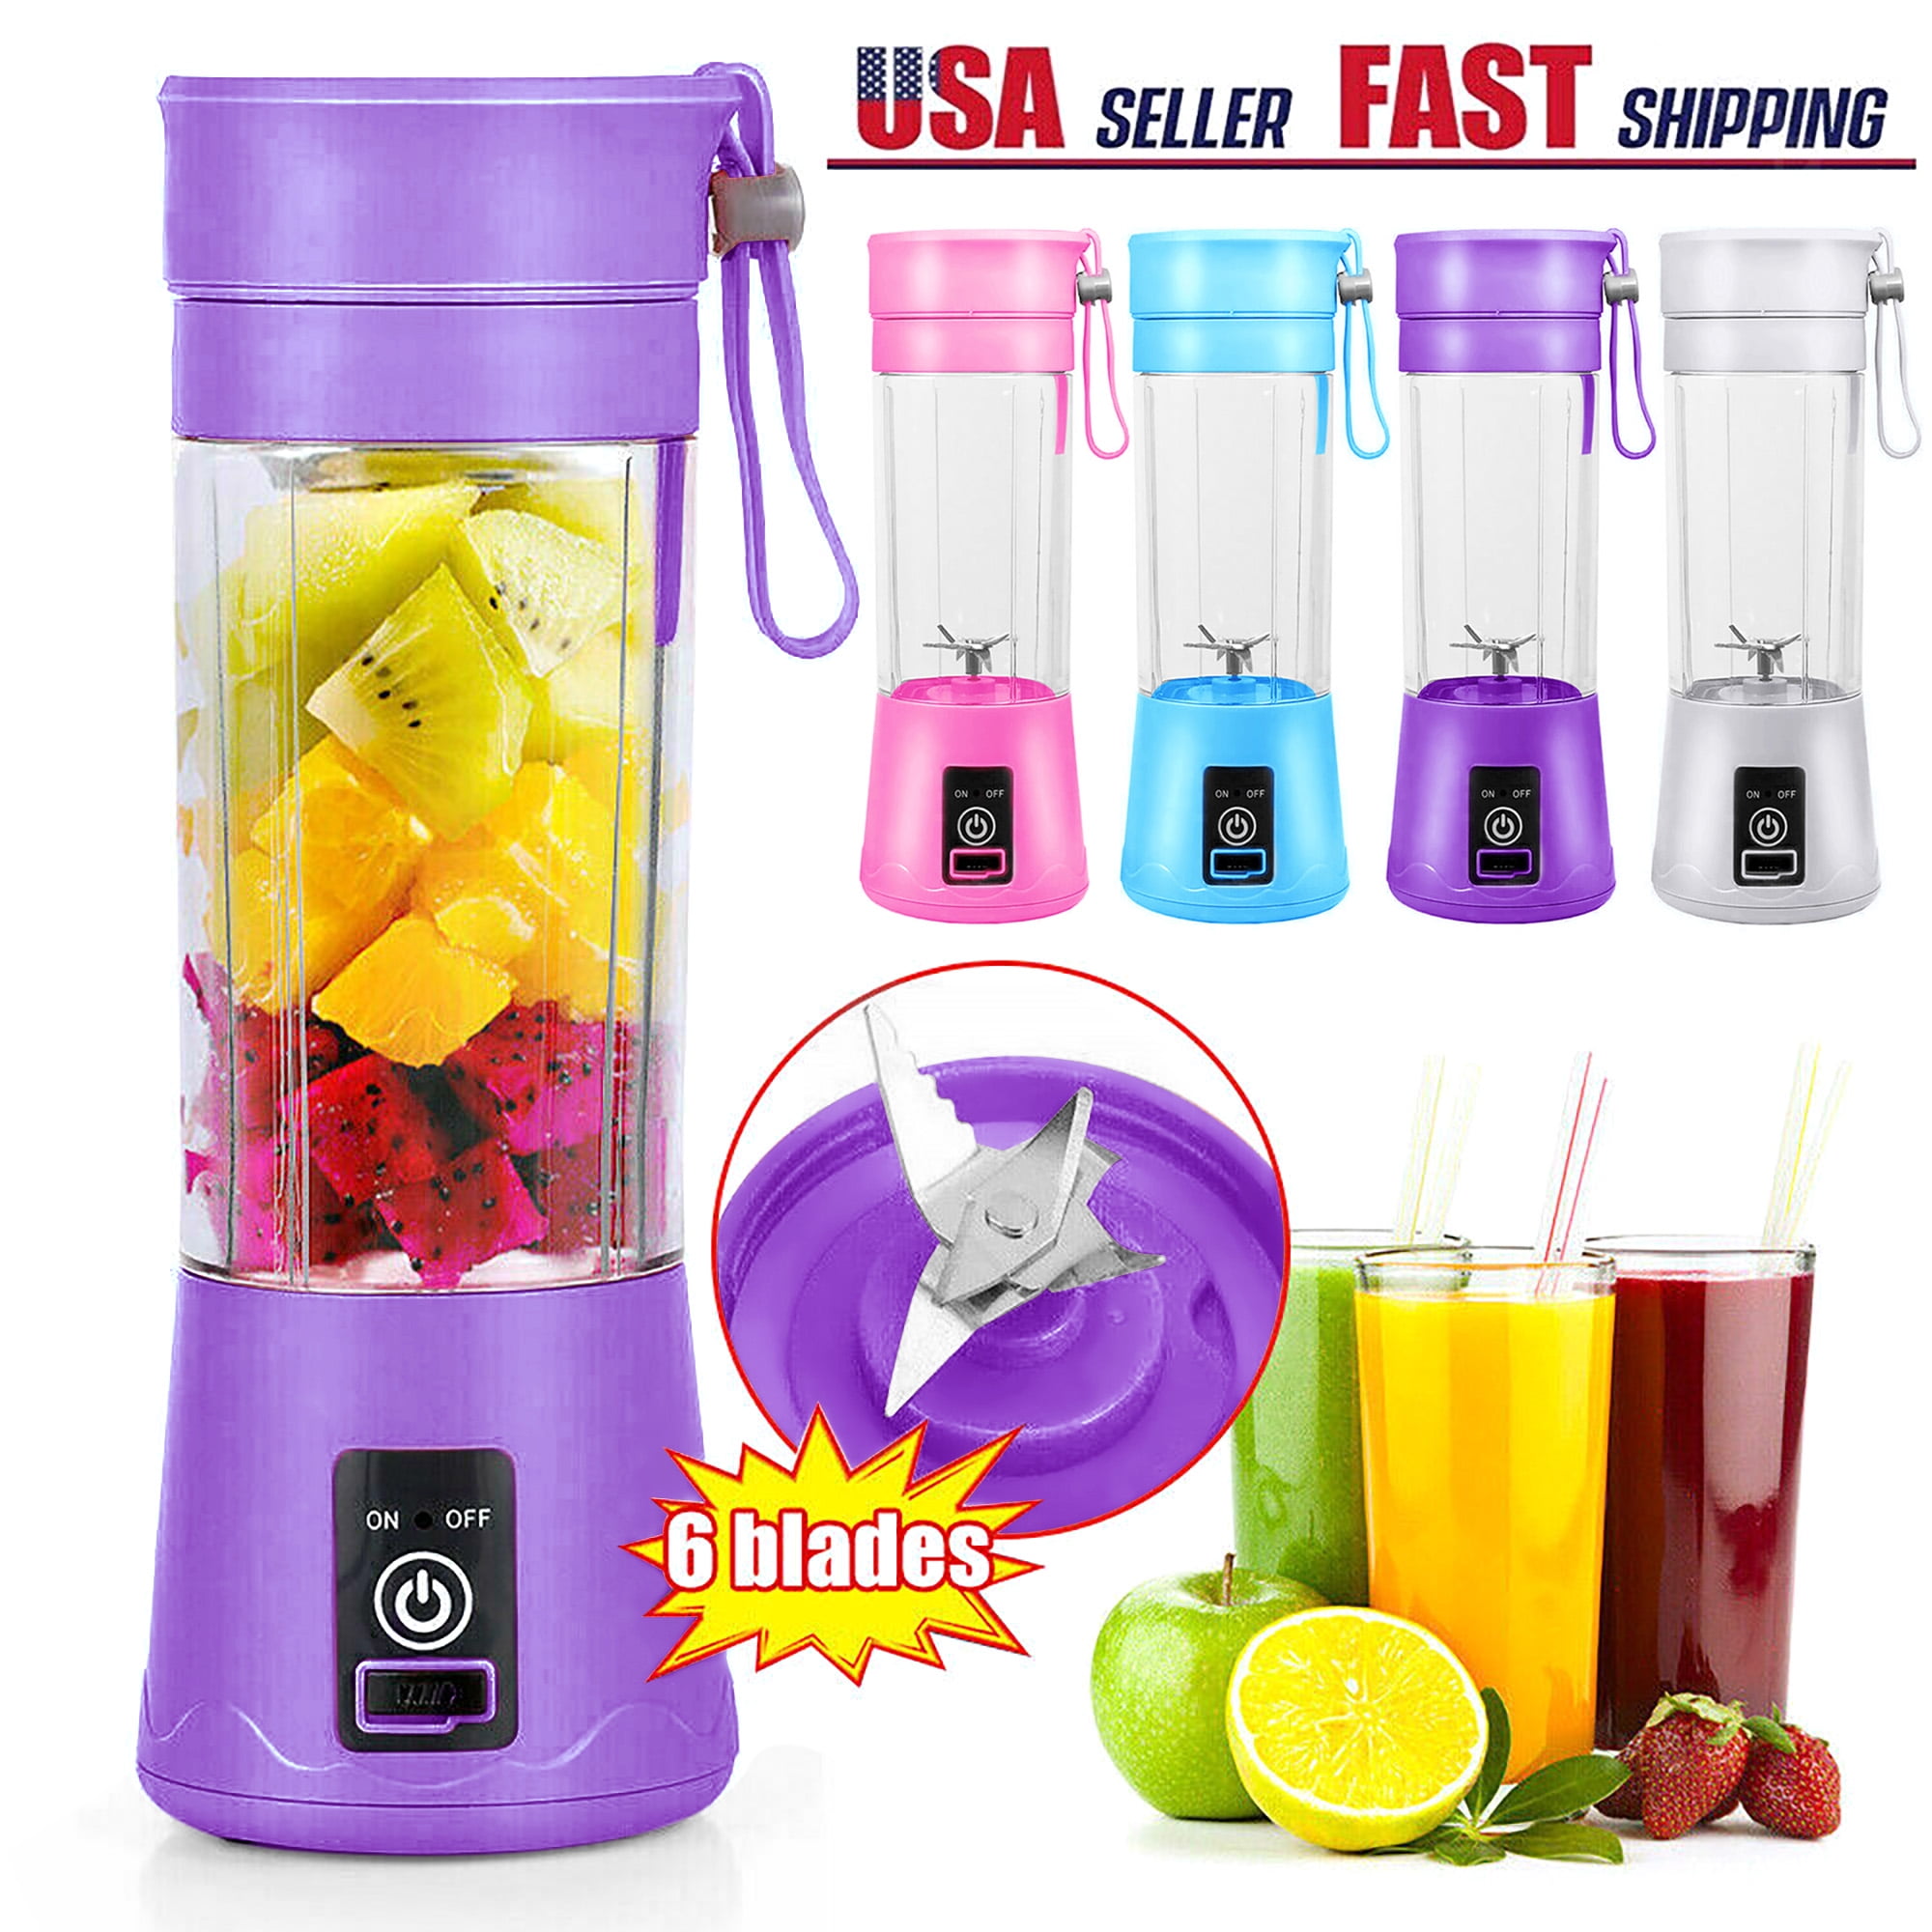 AUOSHI 900W Personal Blender for Shakes and Smoothies Blenders for